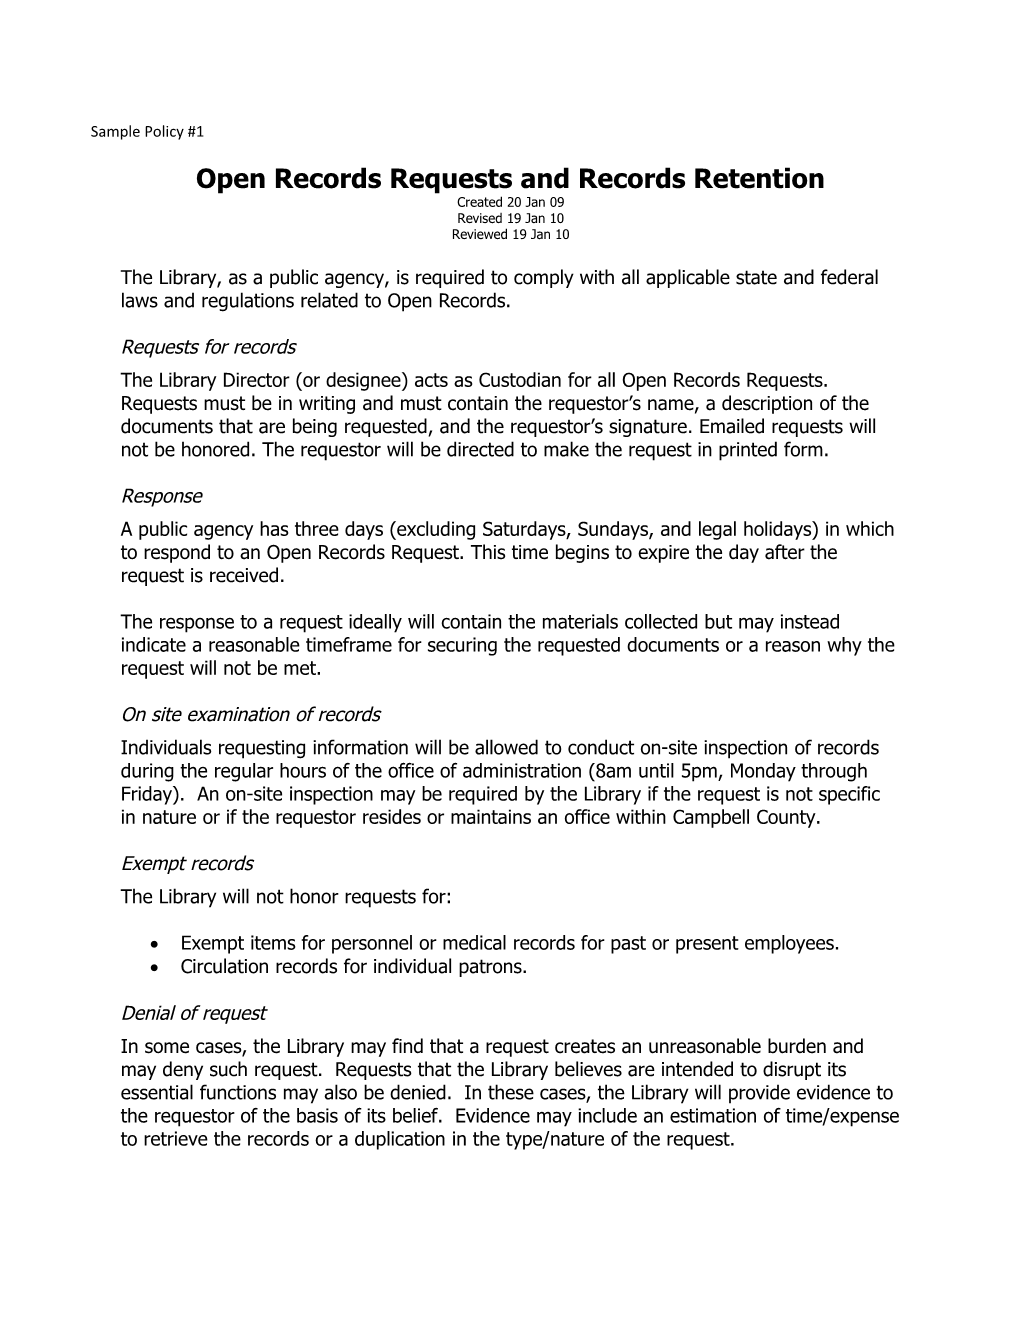 Open Records Requests and Records Retention